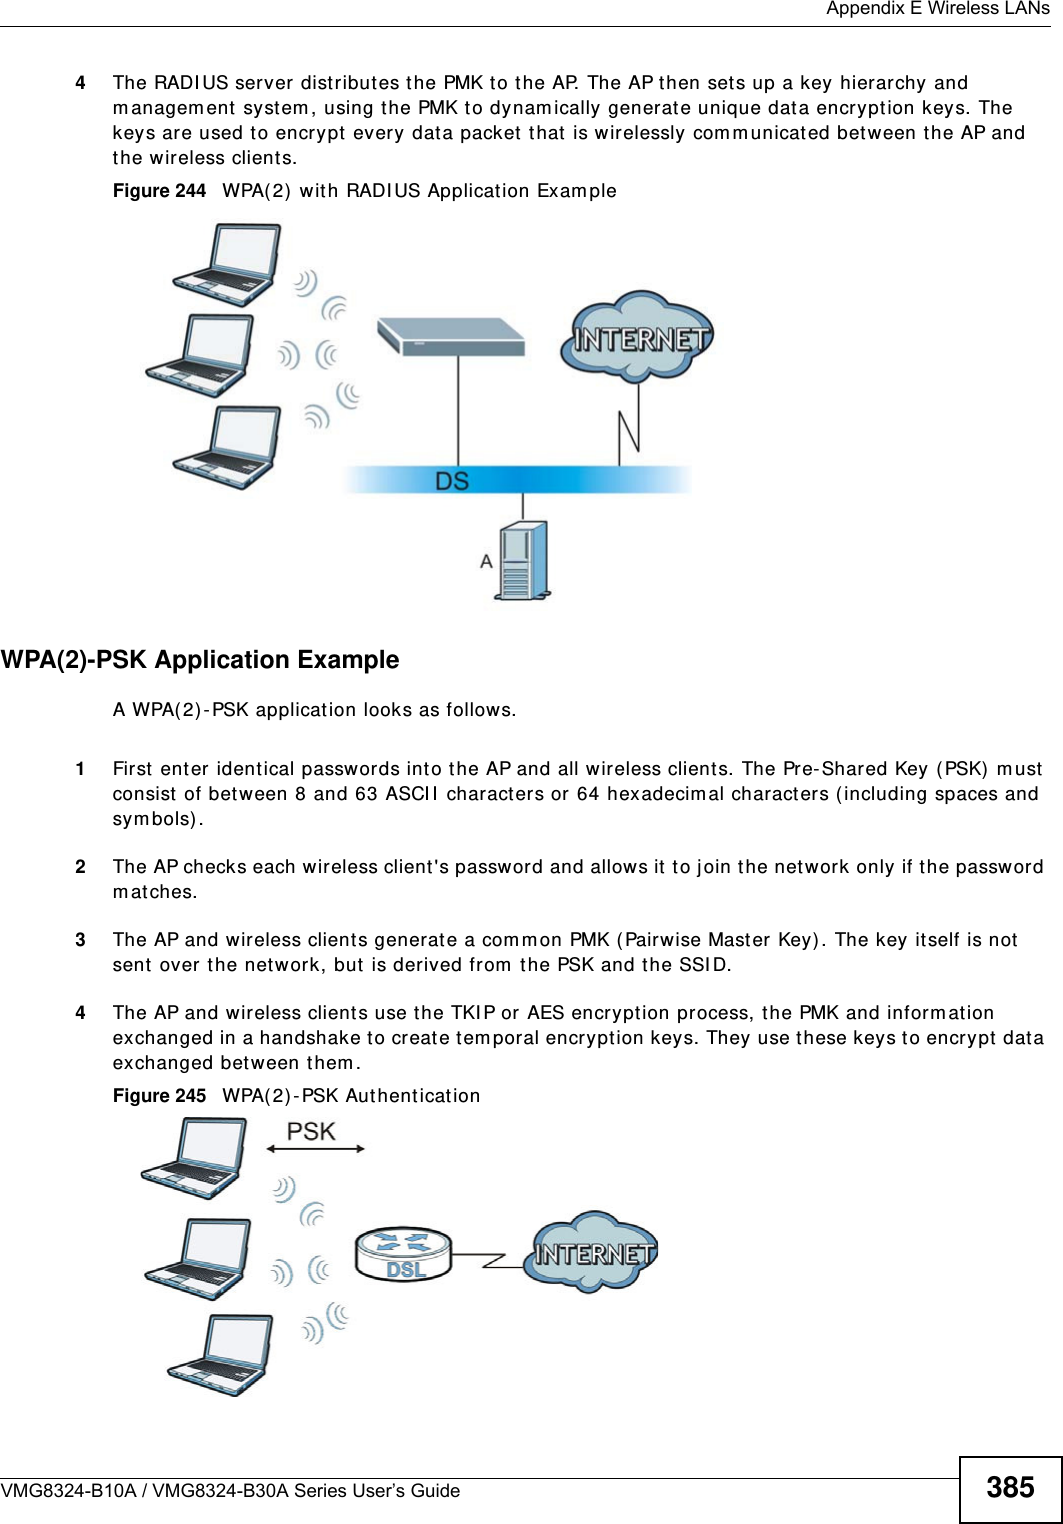  Appendix E Wireless LANsVMG8324-B10A / VMG8324-B30A Series User’s Guide 3854The RADI US server  distributes the PMK t o the AP. The AP then set s up a key hierarchy and m anagem ent  system , using t he PMK to dynam ically generat e unique dat a encryption keys. The keys are used to encrypt every dat a packet that  is wirelessly com m unicated between t he AP and the wireless clients.Figure 244   WPA(2)  wit h RADI US Application Exam pleWPA(2)-PSK Application ExampleA WPA( 2) -PSK applicat ion looks as follows.1First ent er ident ical passwords int o t he AP and all wireless clients. The Pre-Shared Key ( PSK)  m ust consist  of between 8 and 63 ASCI I  characters or 64 hexadecim al characters ( including spaces and sy m bols) .2The AP checks each wireless client&apos;s password and allows it to j oin t he network only if the password m at ches.3The AP and w ireless clients generate a com m on PMK (Pairwise Mast er Key). The key it self is not  sent over t he net work, but  is derived from  the PSK and the SSI D. 4The AP and wireless clients use t he TKI P or AES encryption process, t he PMK and inform ation exchanged in a handshake to creat e t em poral encr yption keys. They use t hese keys to encrypt  data exchanged bet ween them .Figure 245   WPA(2) -PSK Authent icat ion